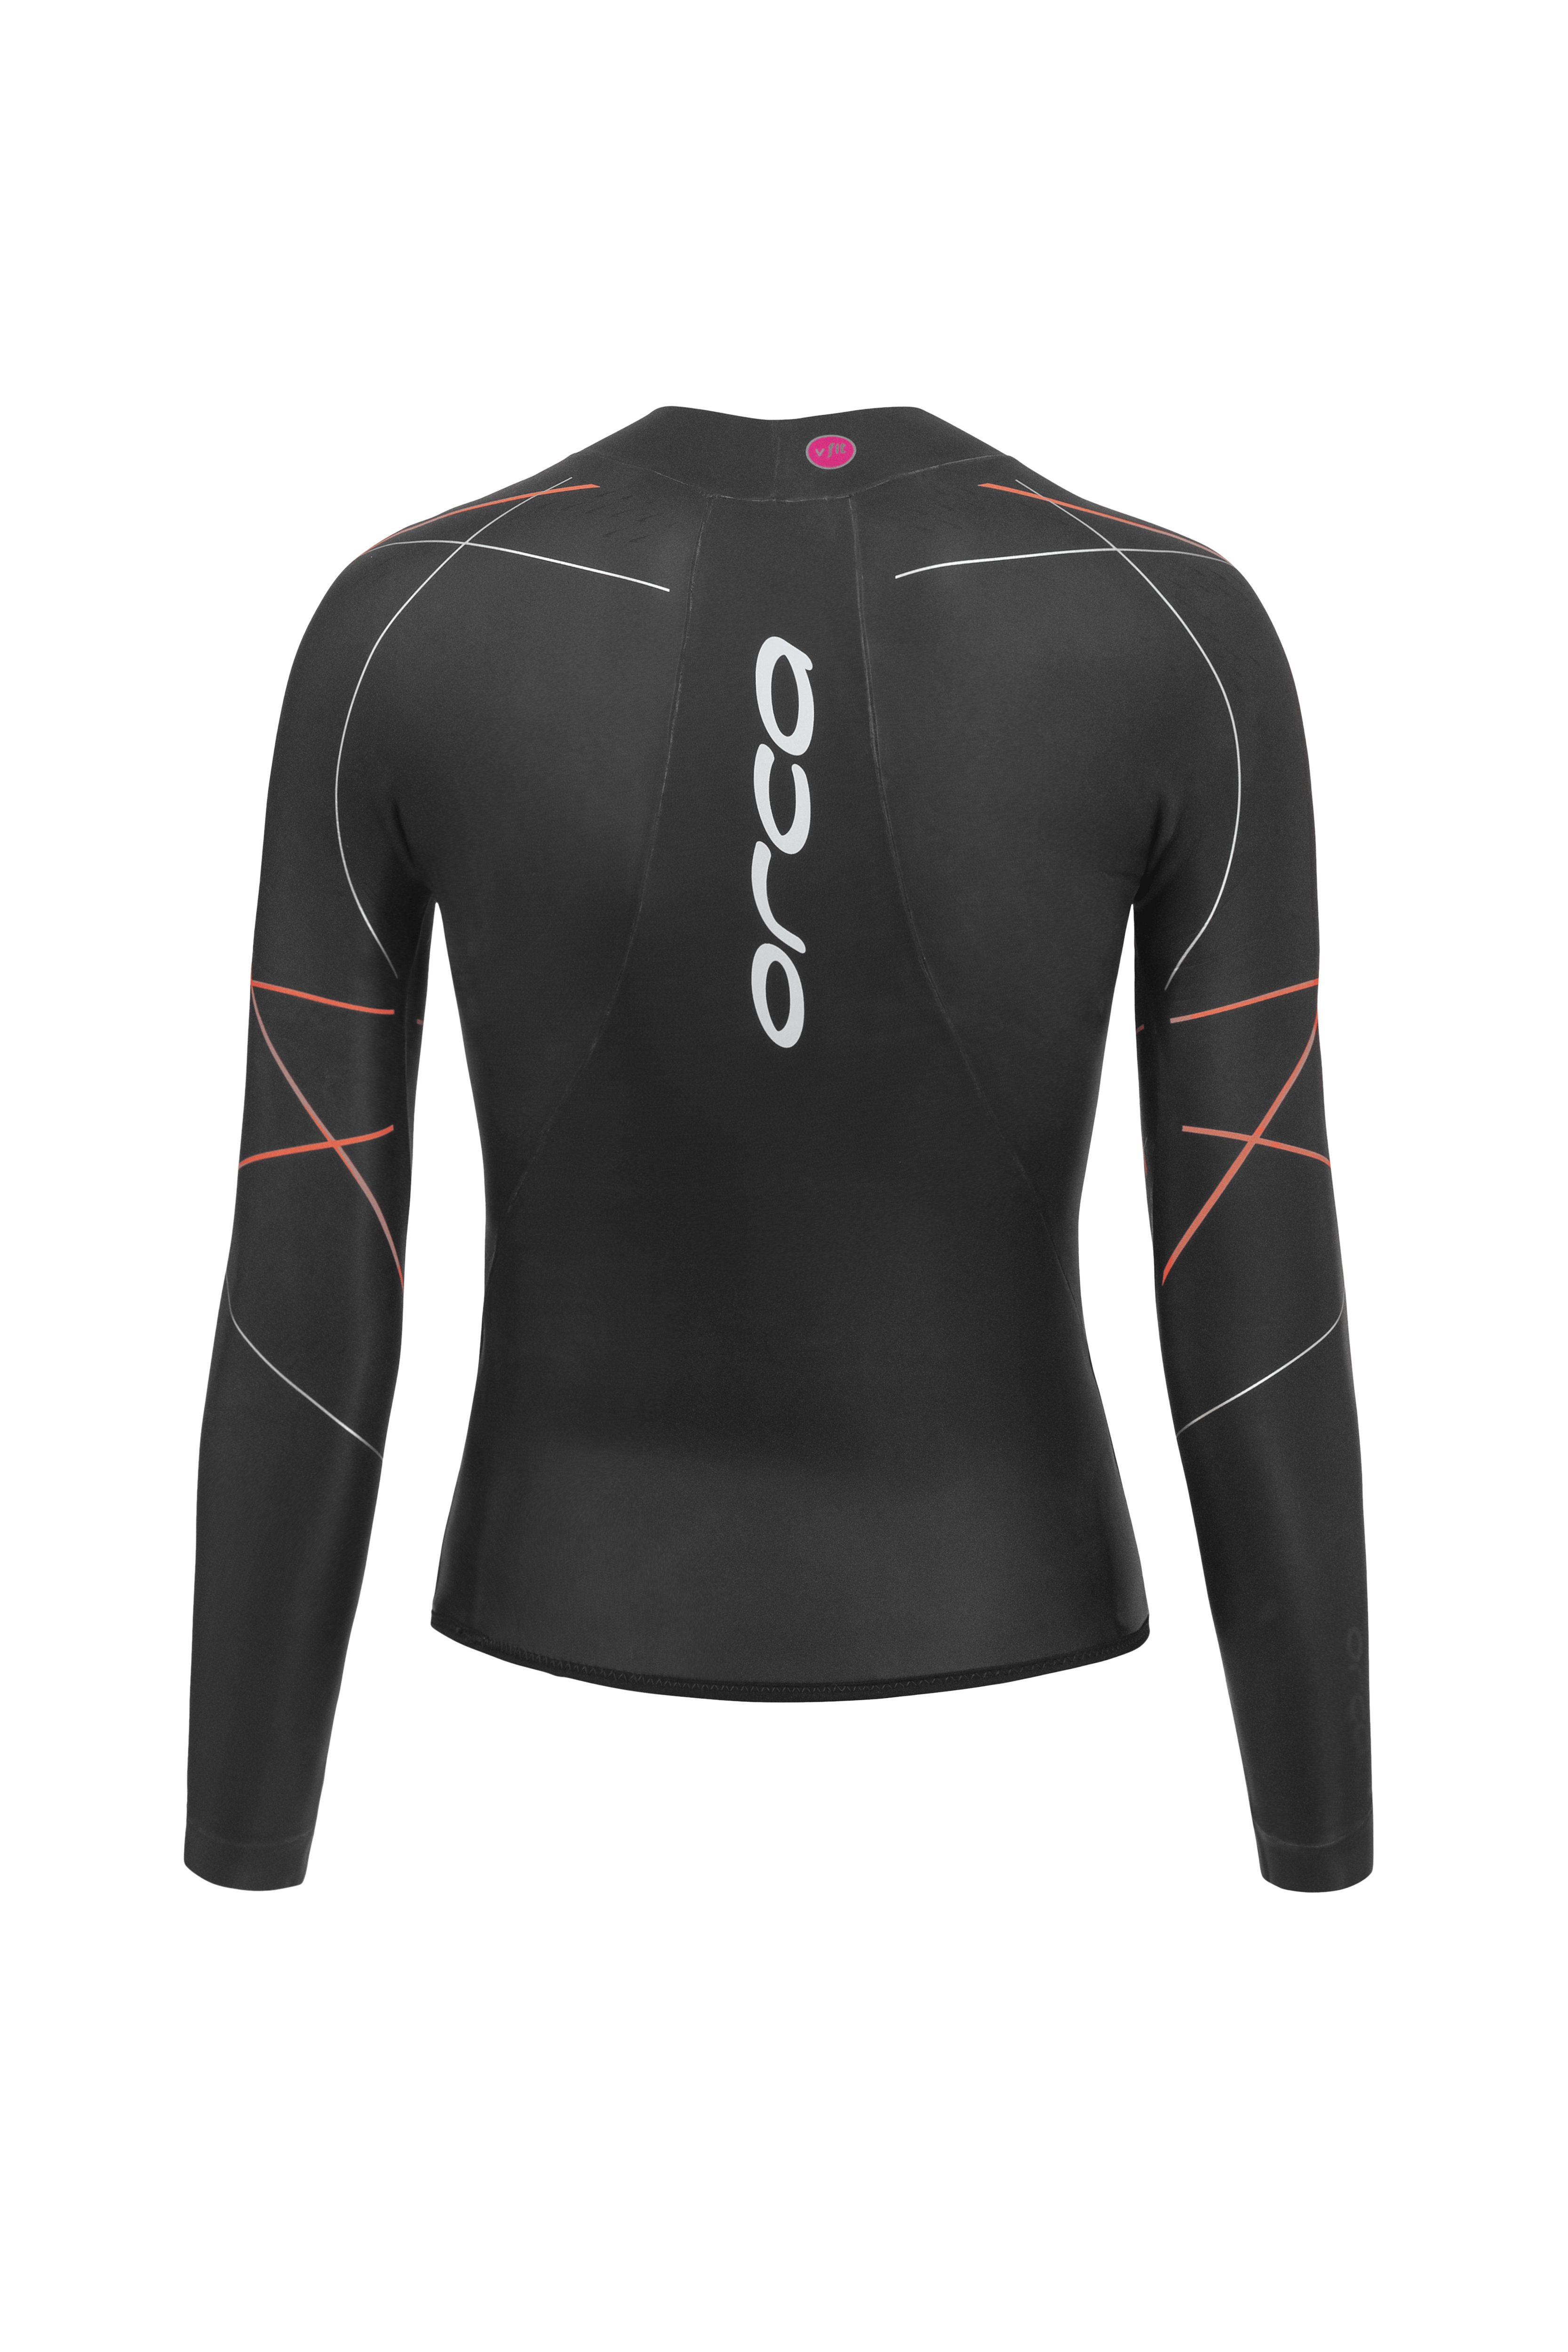 orca Ocean Swimming Openwater RS1 Top Womens Wetsuit